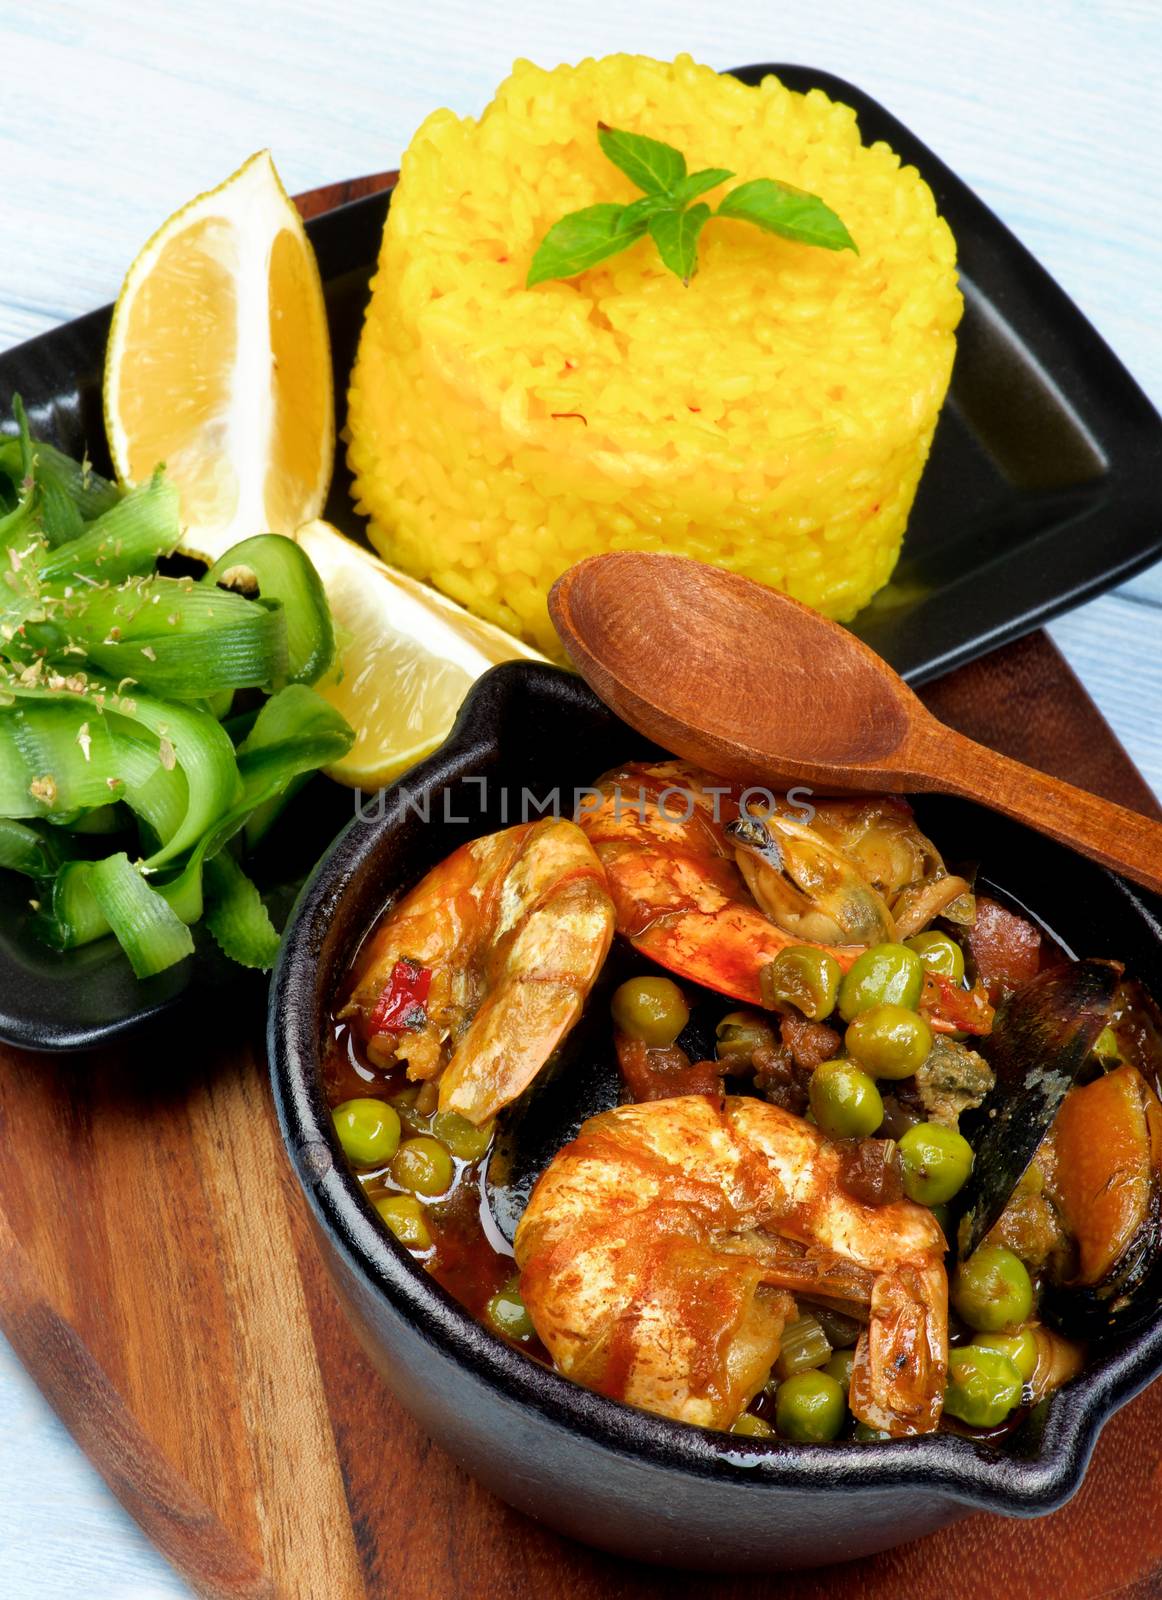 Delicious Seafood Curry with Saffron Rice, Cucumber Salad  and Lemon Served on Board closeup on Wooden background. Focus on Foreground